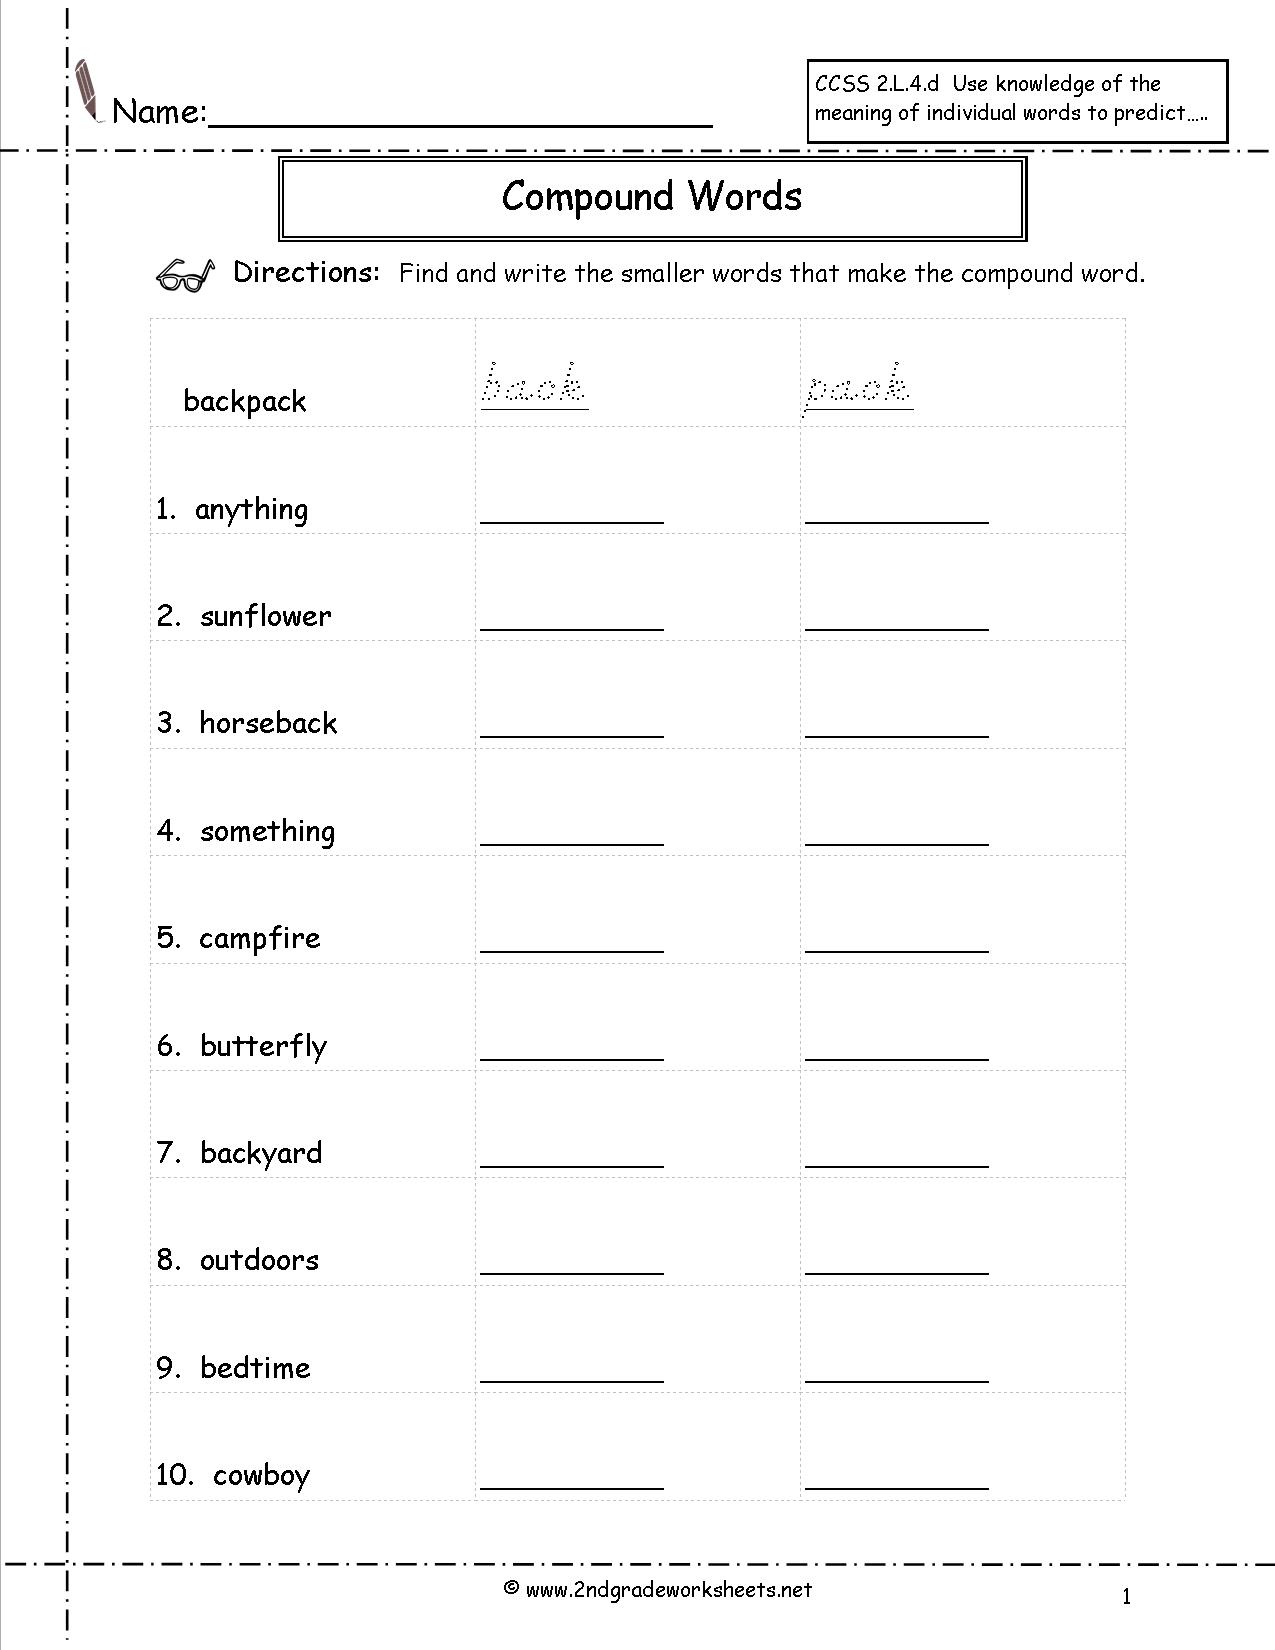 English Compound Words Worksheets